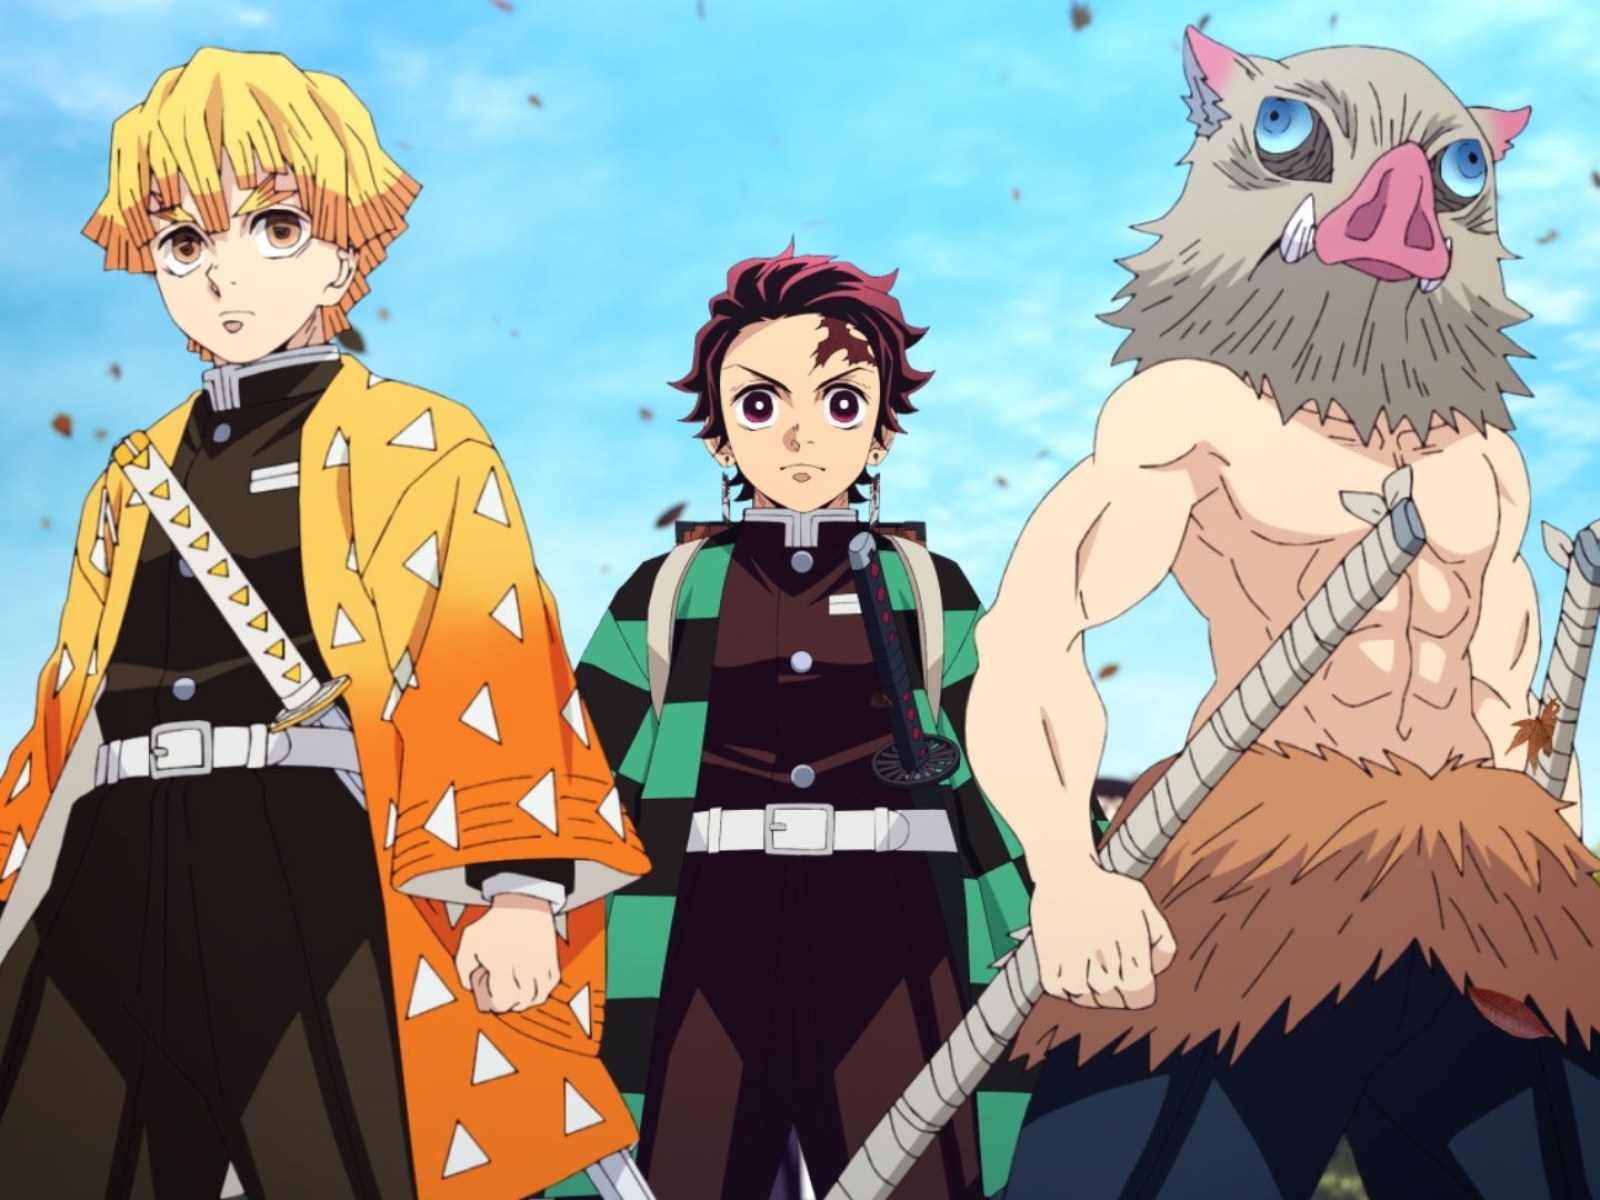 Picnic with Tanjiro 🟩⬛️ Inosuke 🐗 Zenitsu ⚡️and onigiri 🍙 😋 Who is your  favorite character out of these 3, let us know!